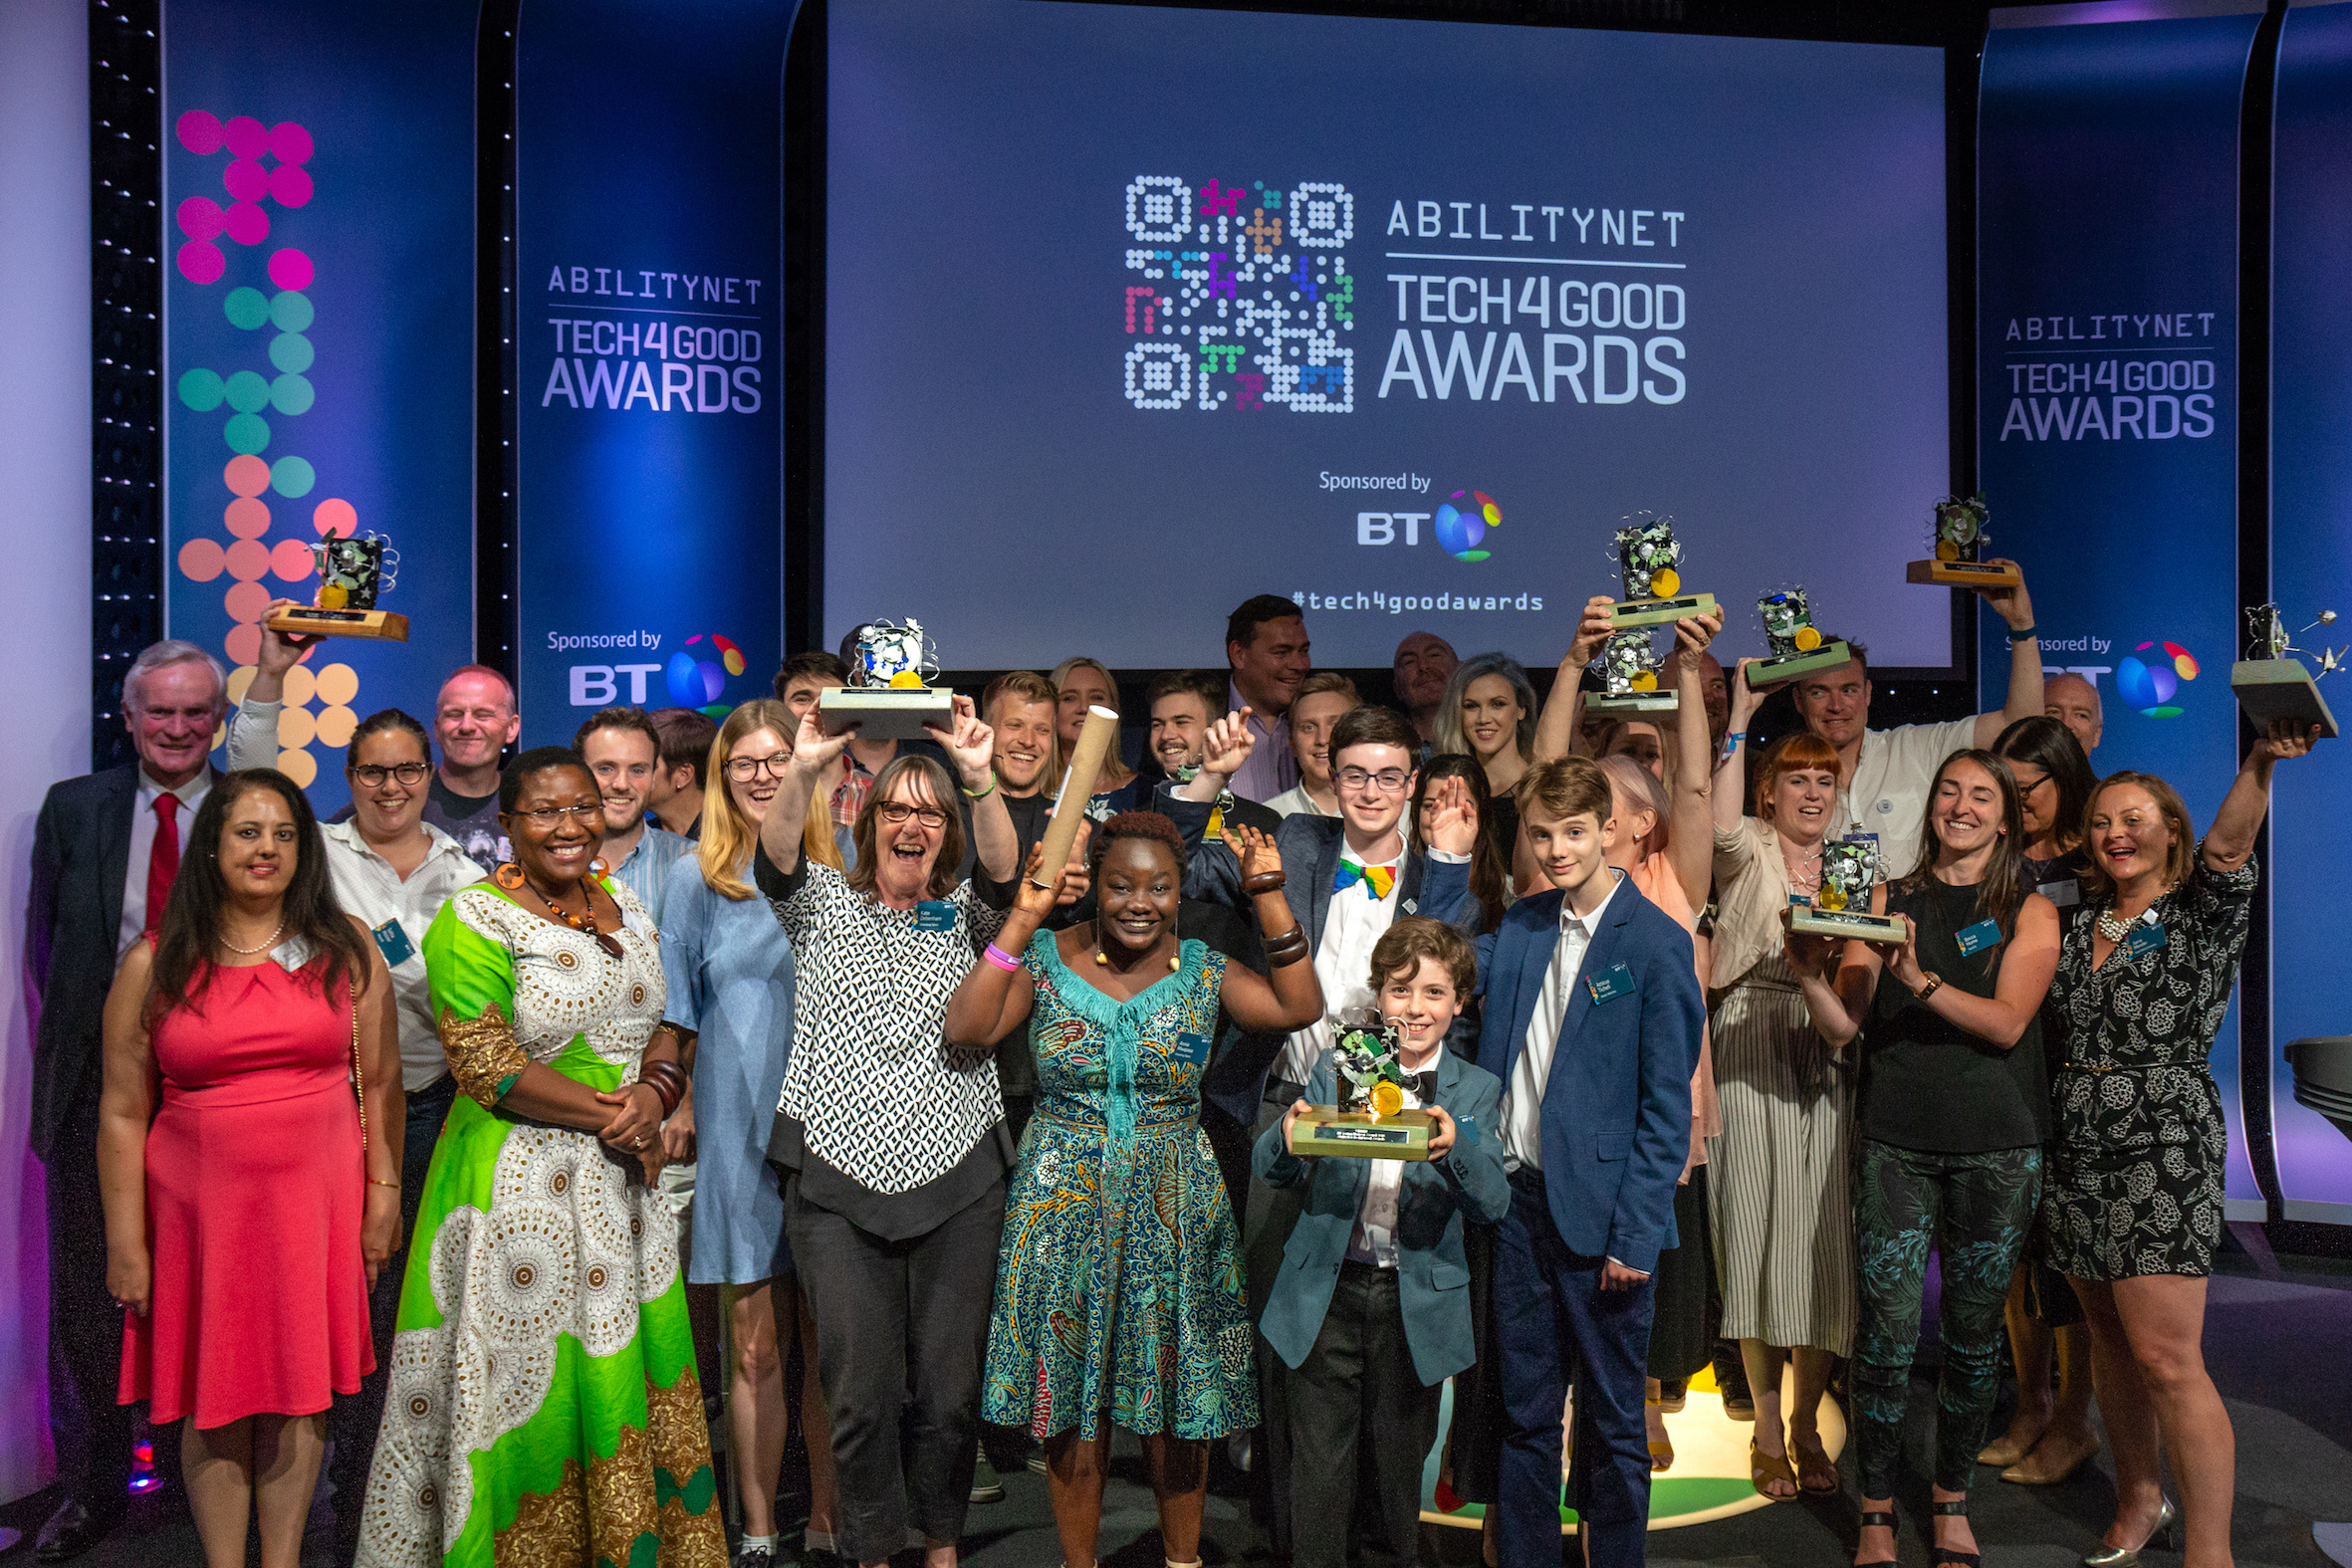 The 2018 AbilityNet Tech4Good Awards winners alongside presenters and judges